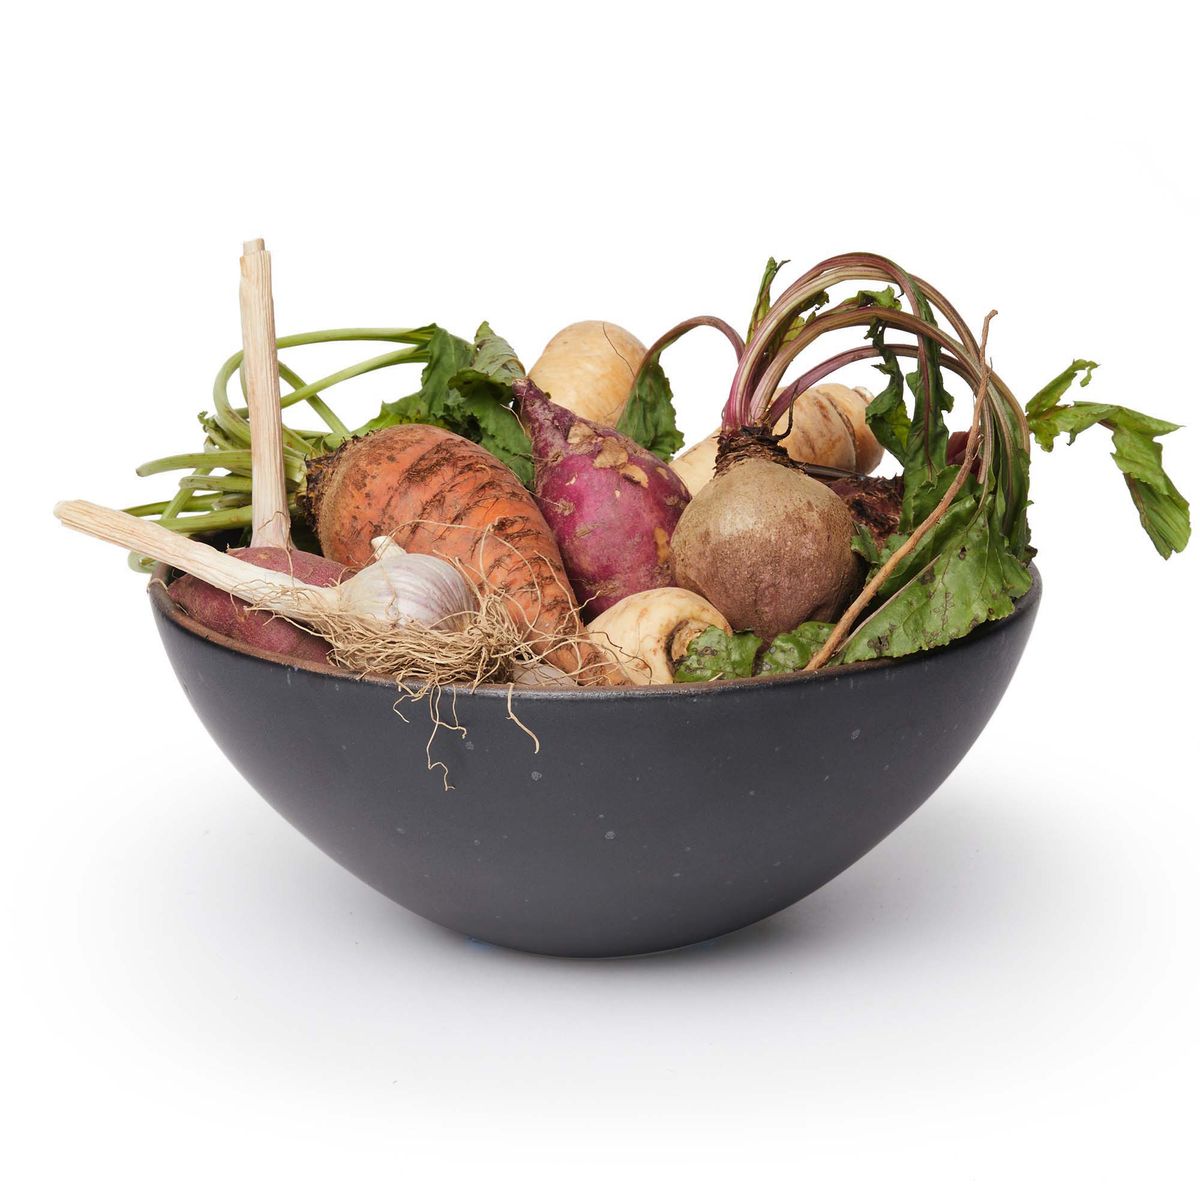 A large ceramic mixing bowl in a graphite black color featuring iron speckles and an unglazed rim, filled with vegetables